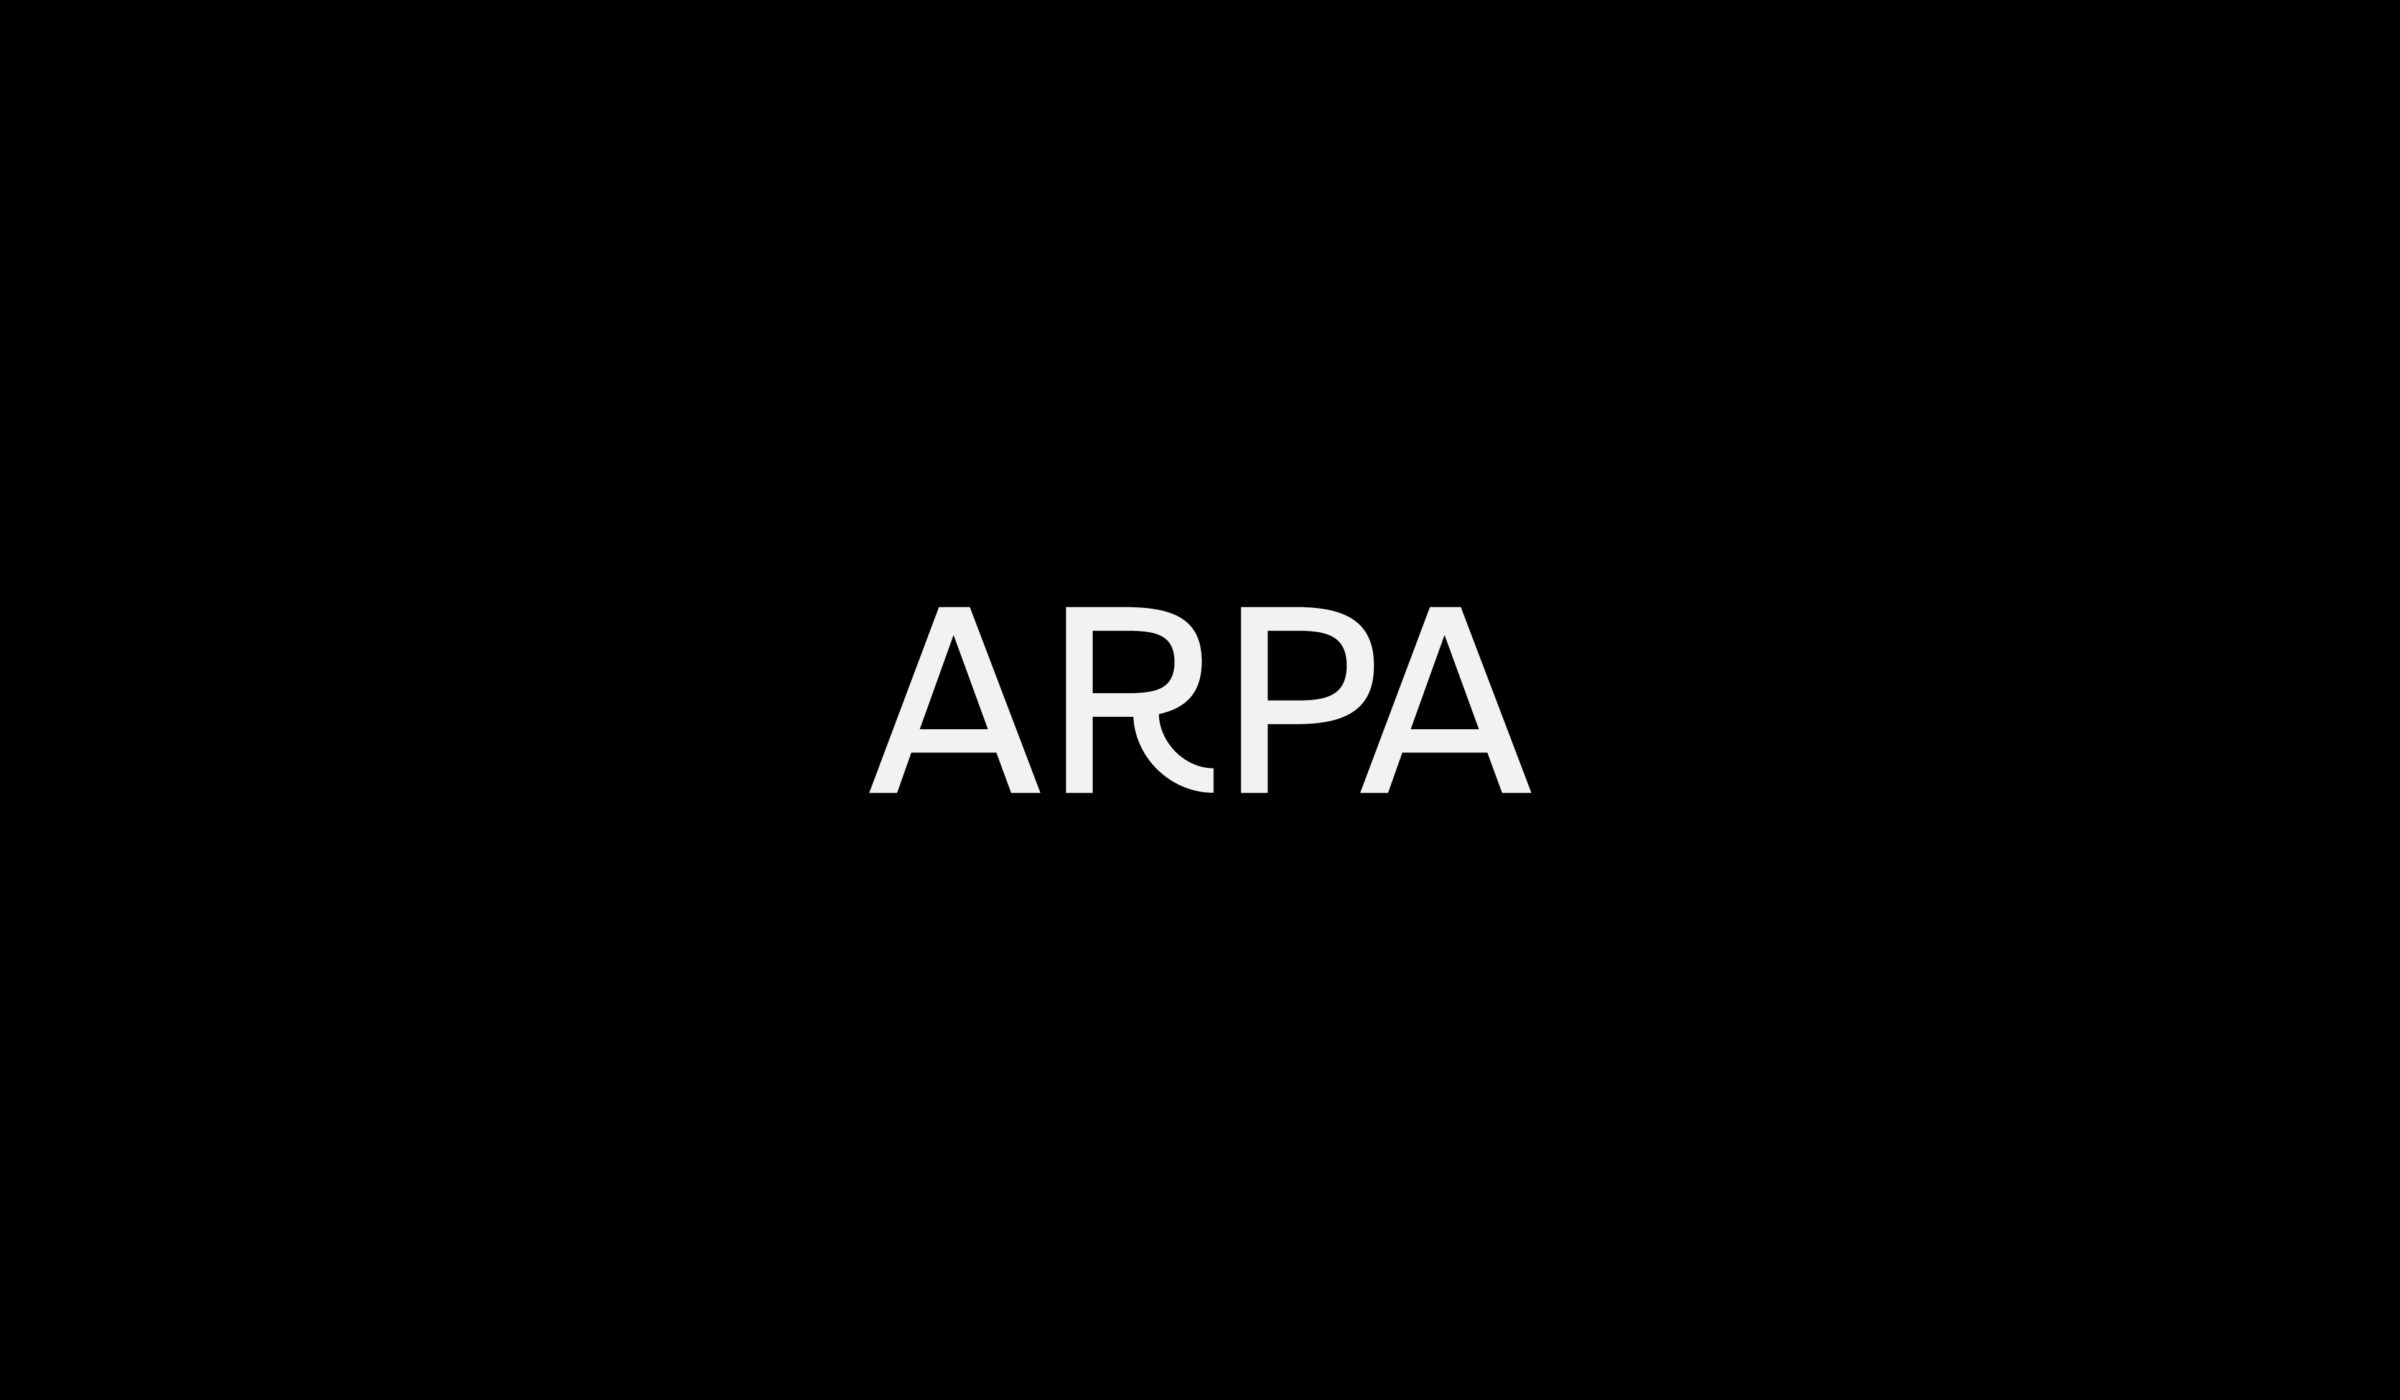 FOLCH - New review of Arpa Editores